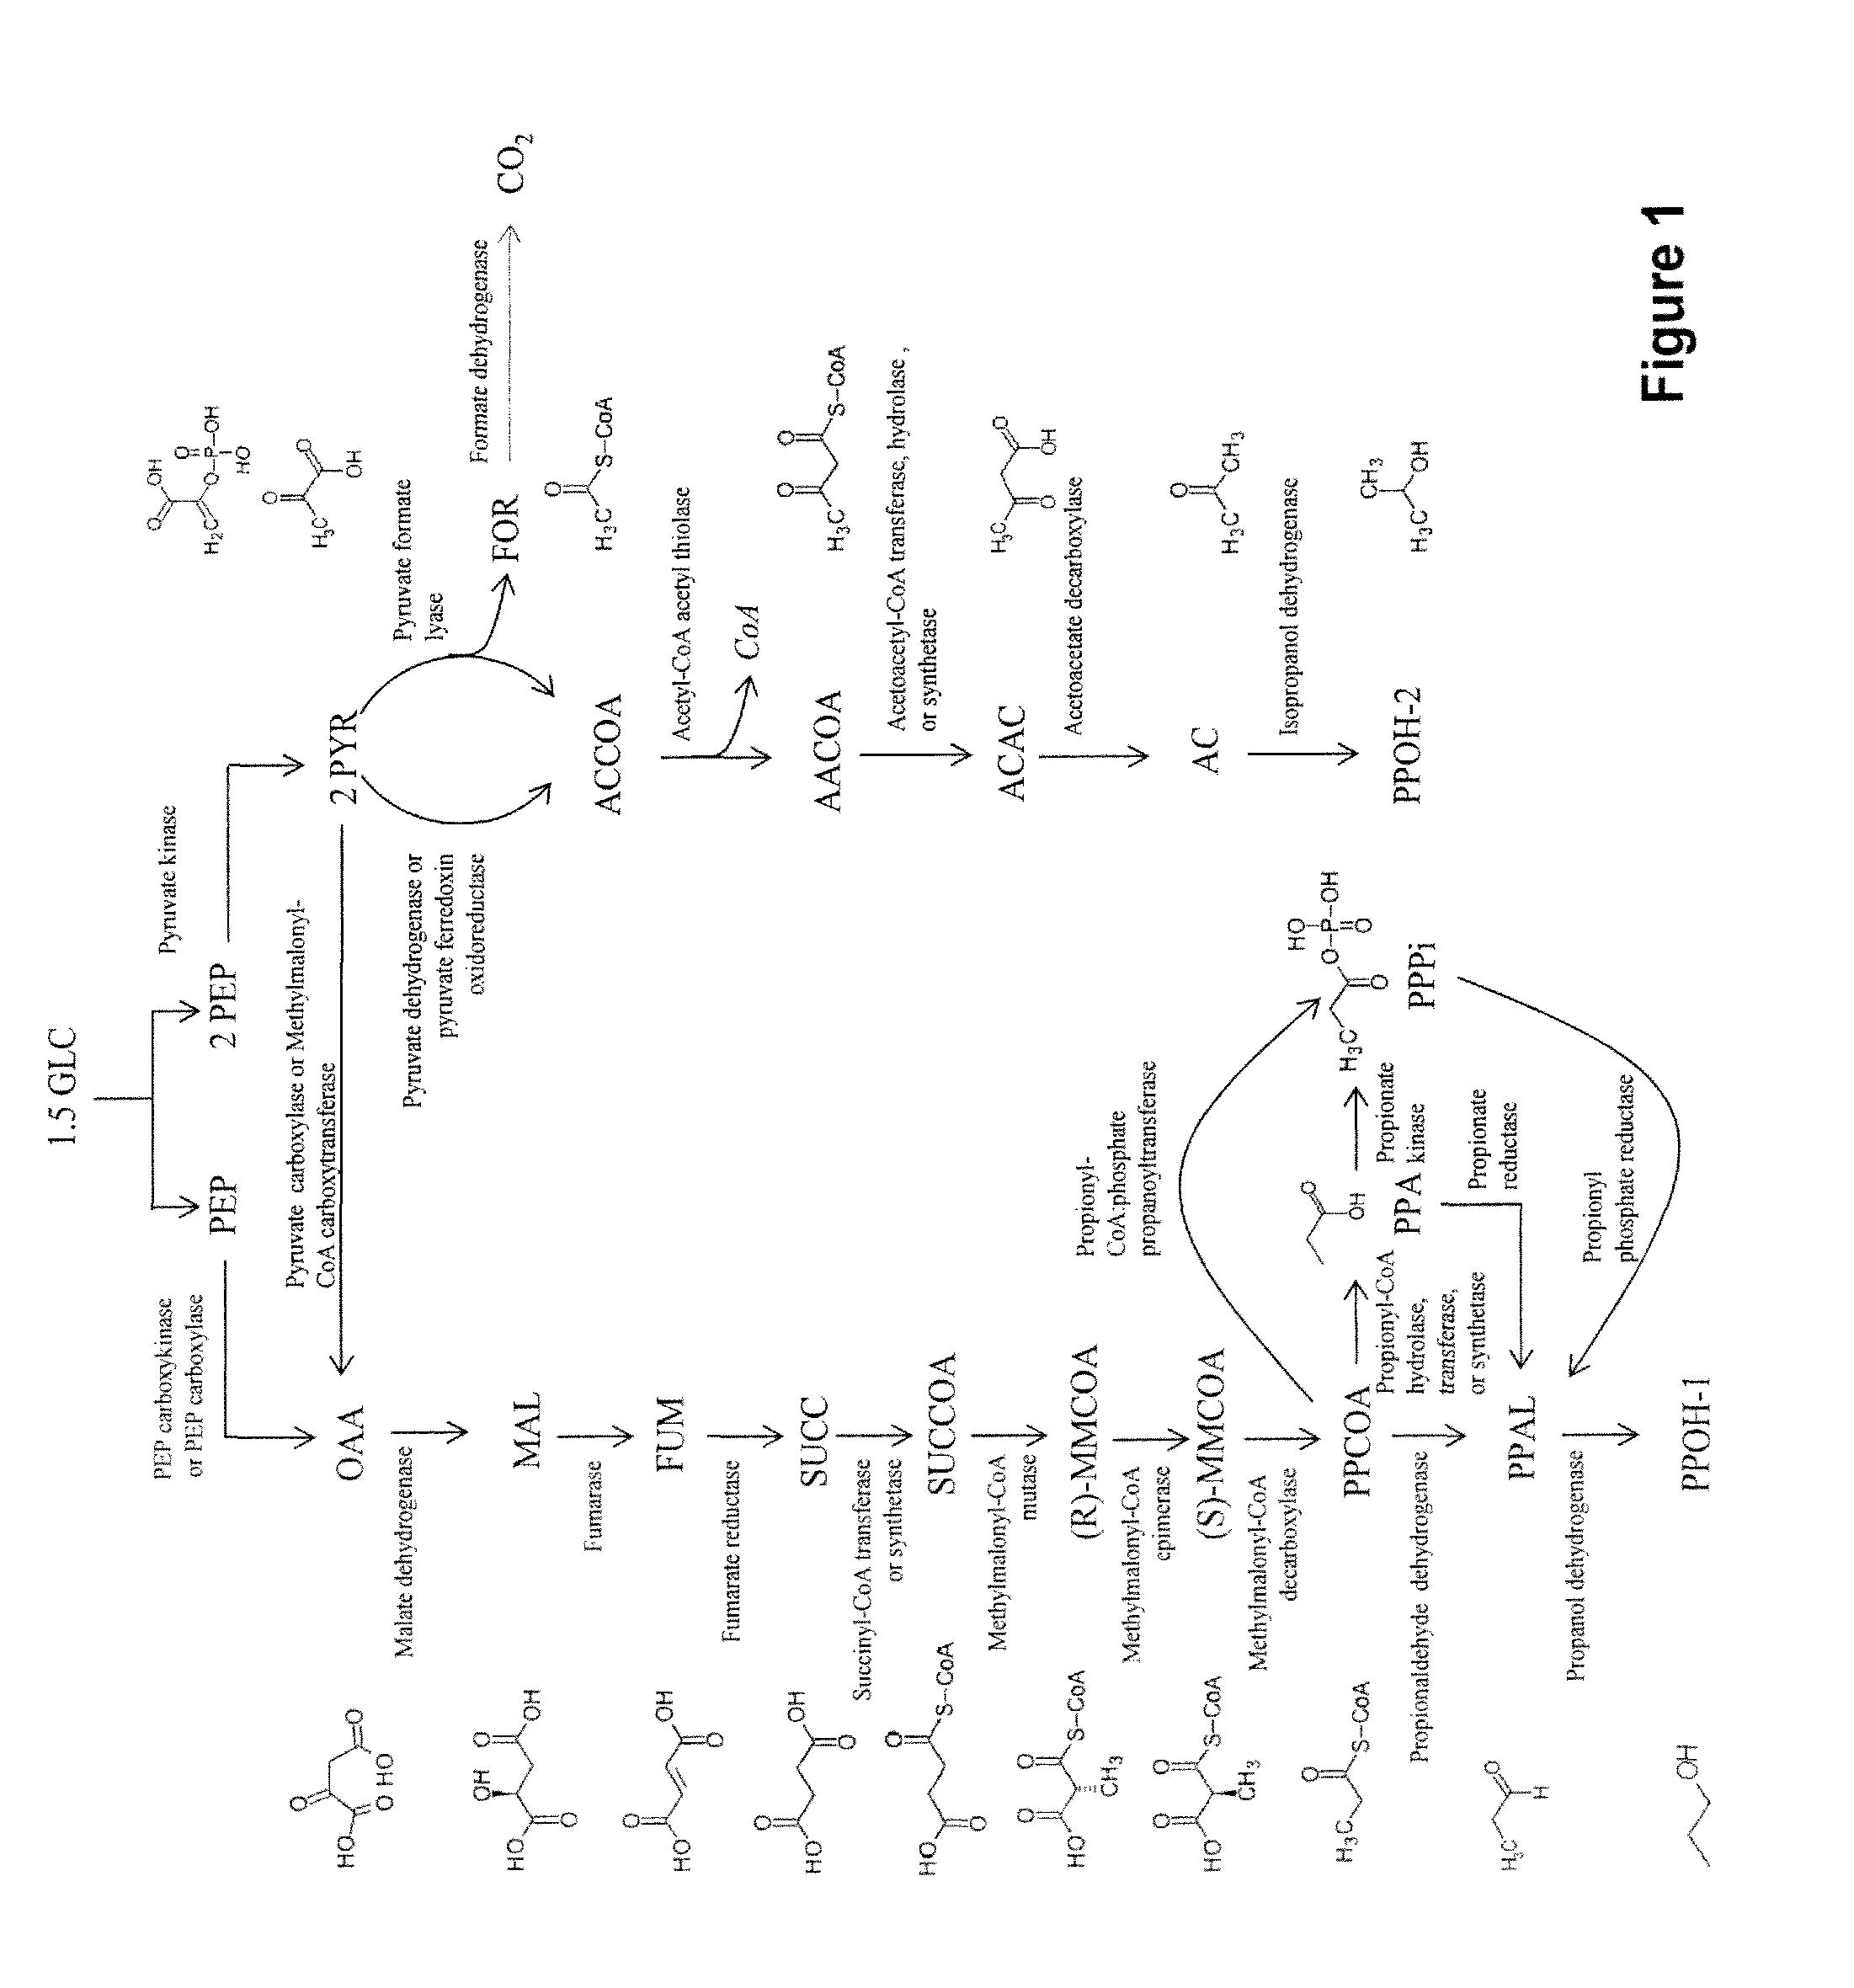 Microorganisms and methods for the co-production of isopropanol and 1,4-butanediol